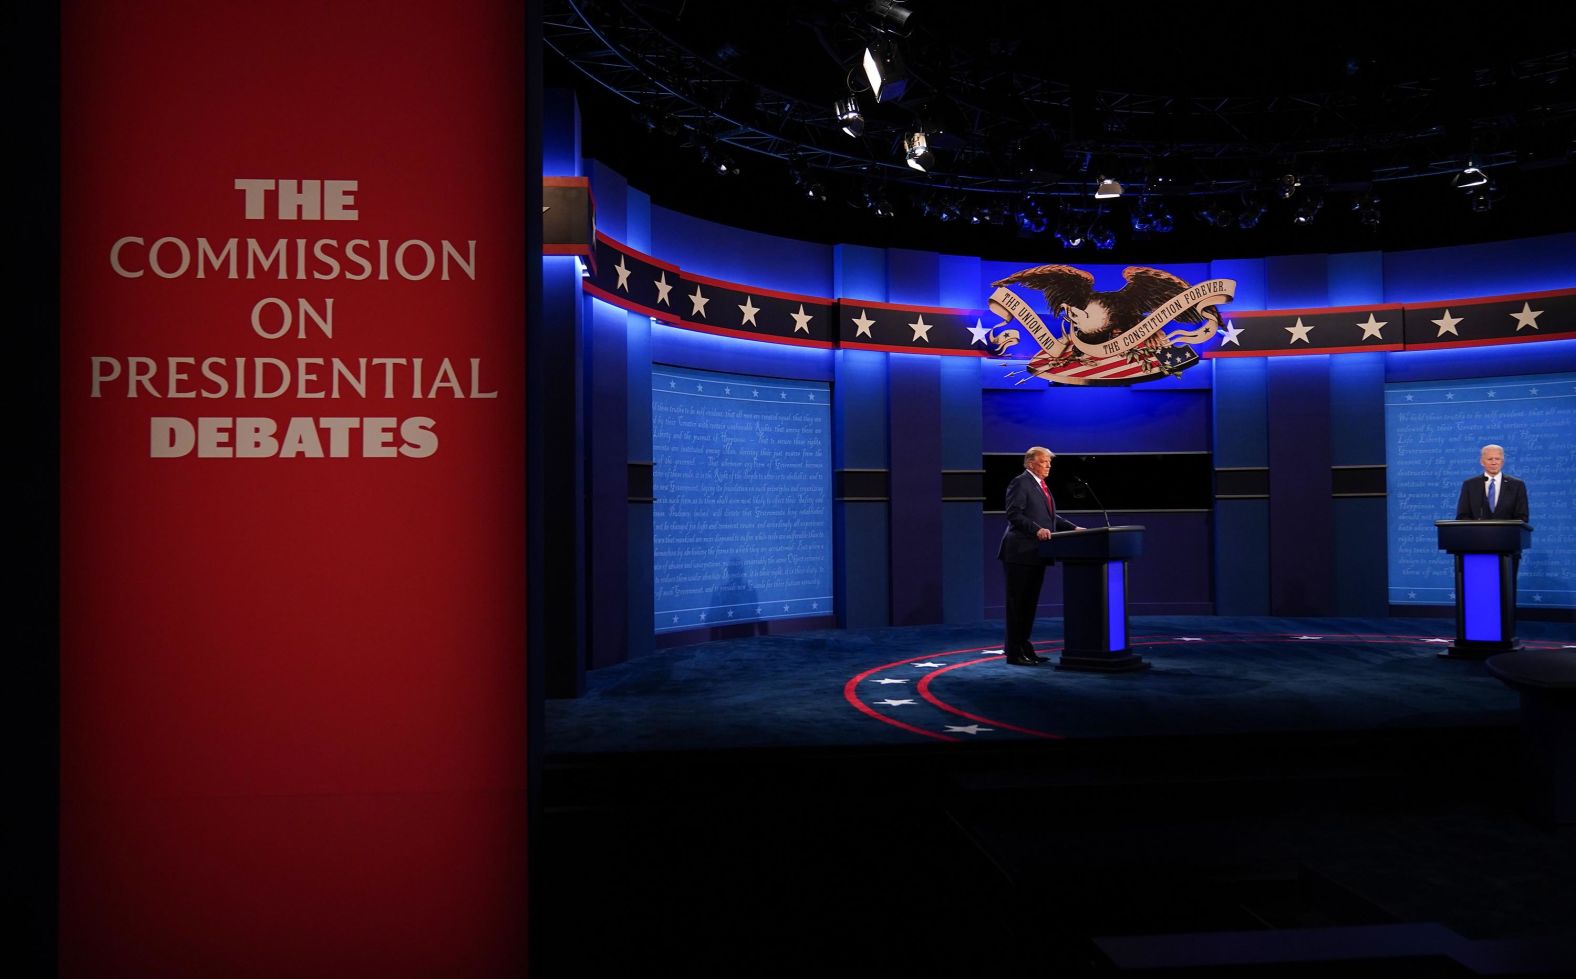 The debate took place on the campus of Belmont University in Nashville.